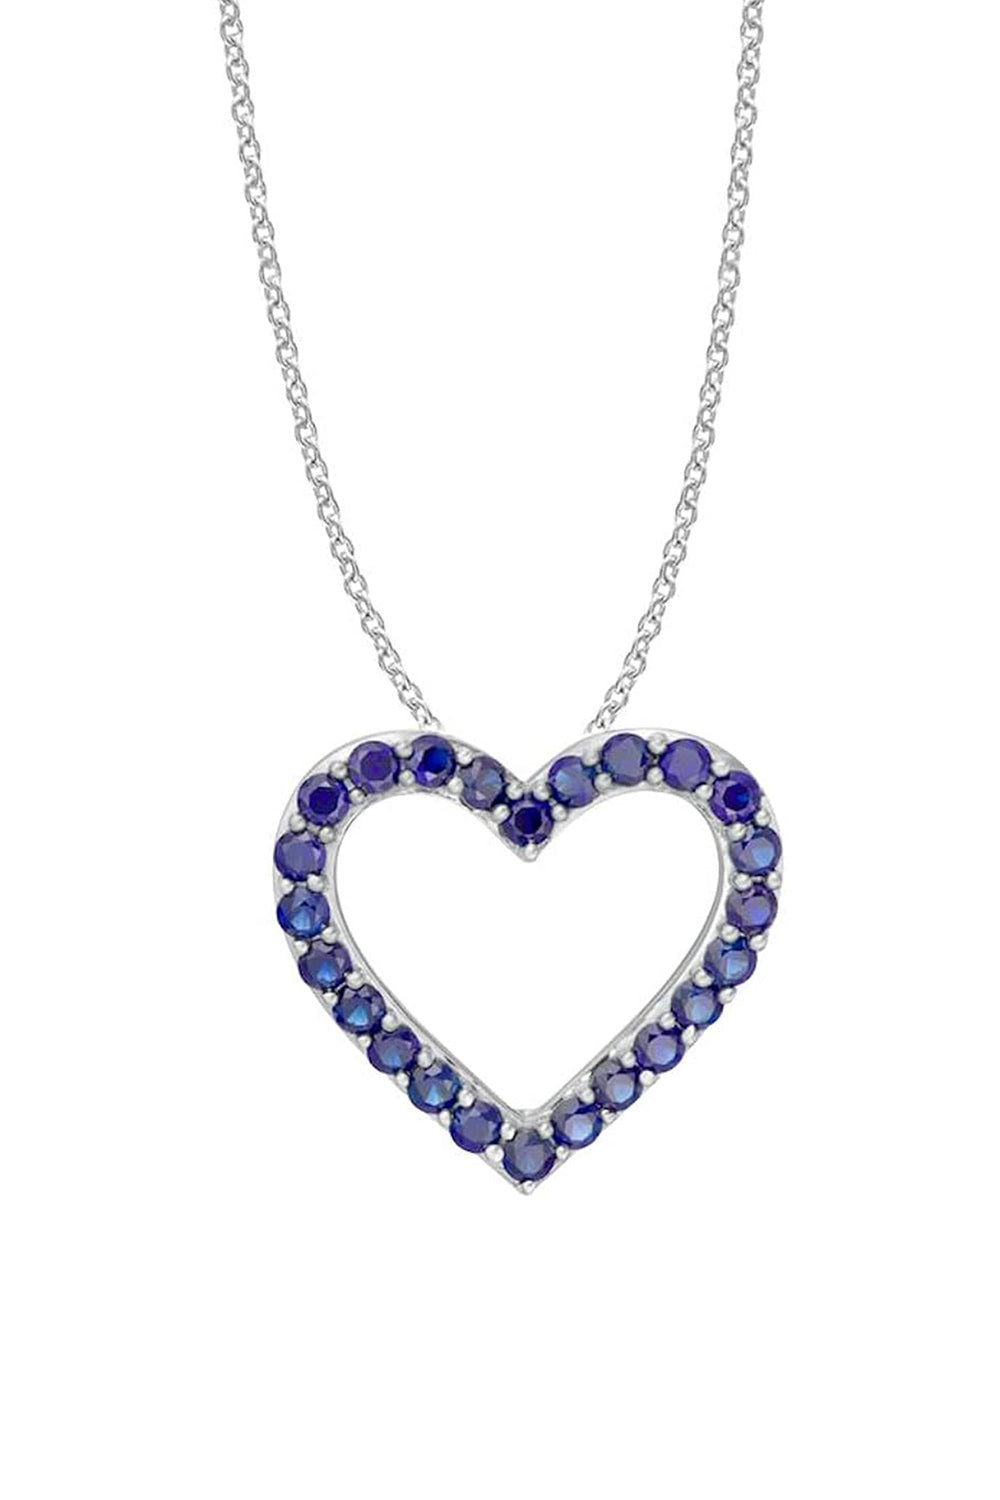 White Gold Chain with Blue Sapphire Open Heart Pendant